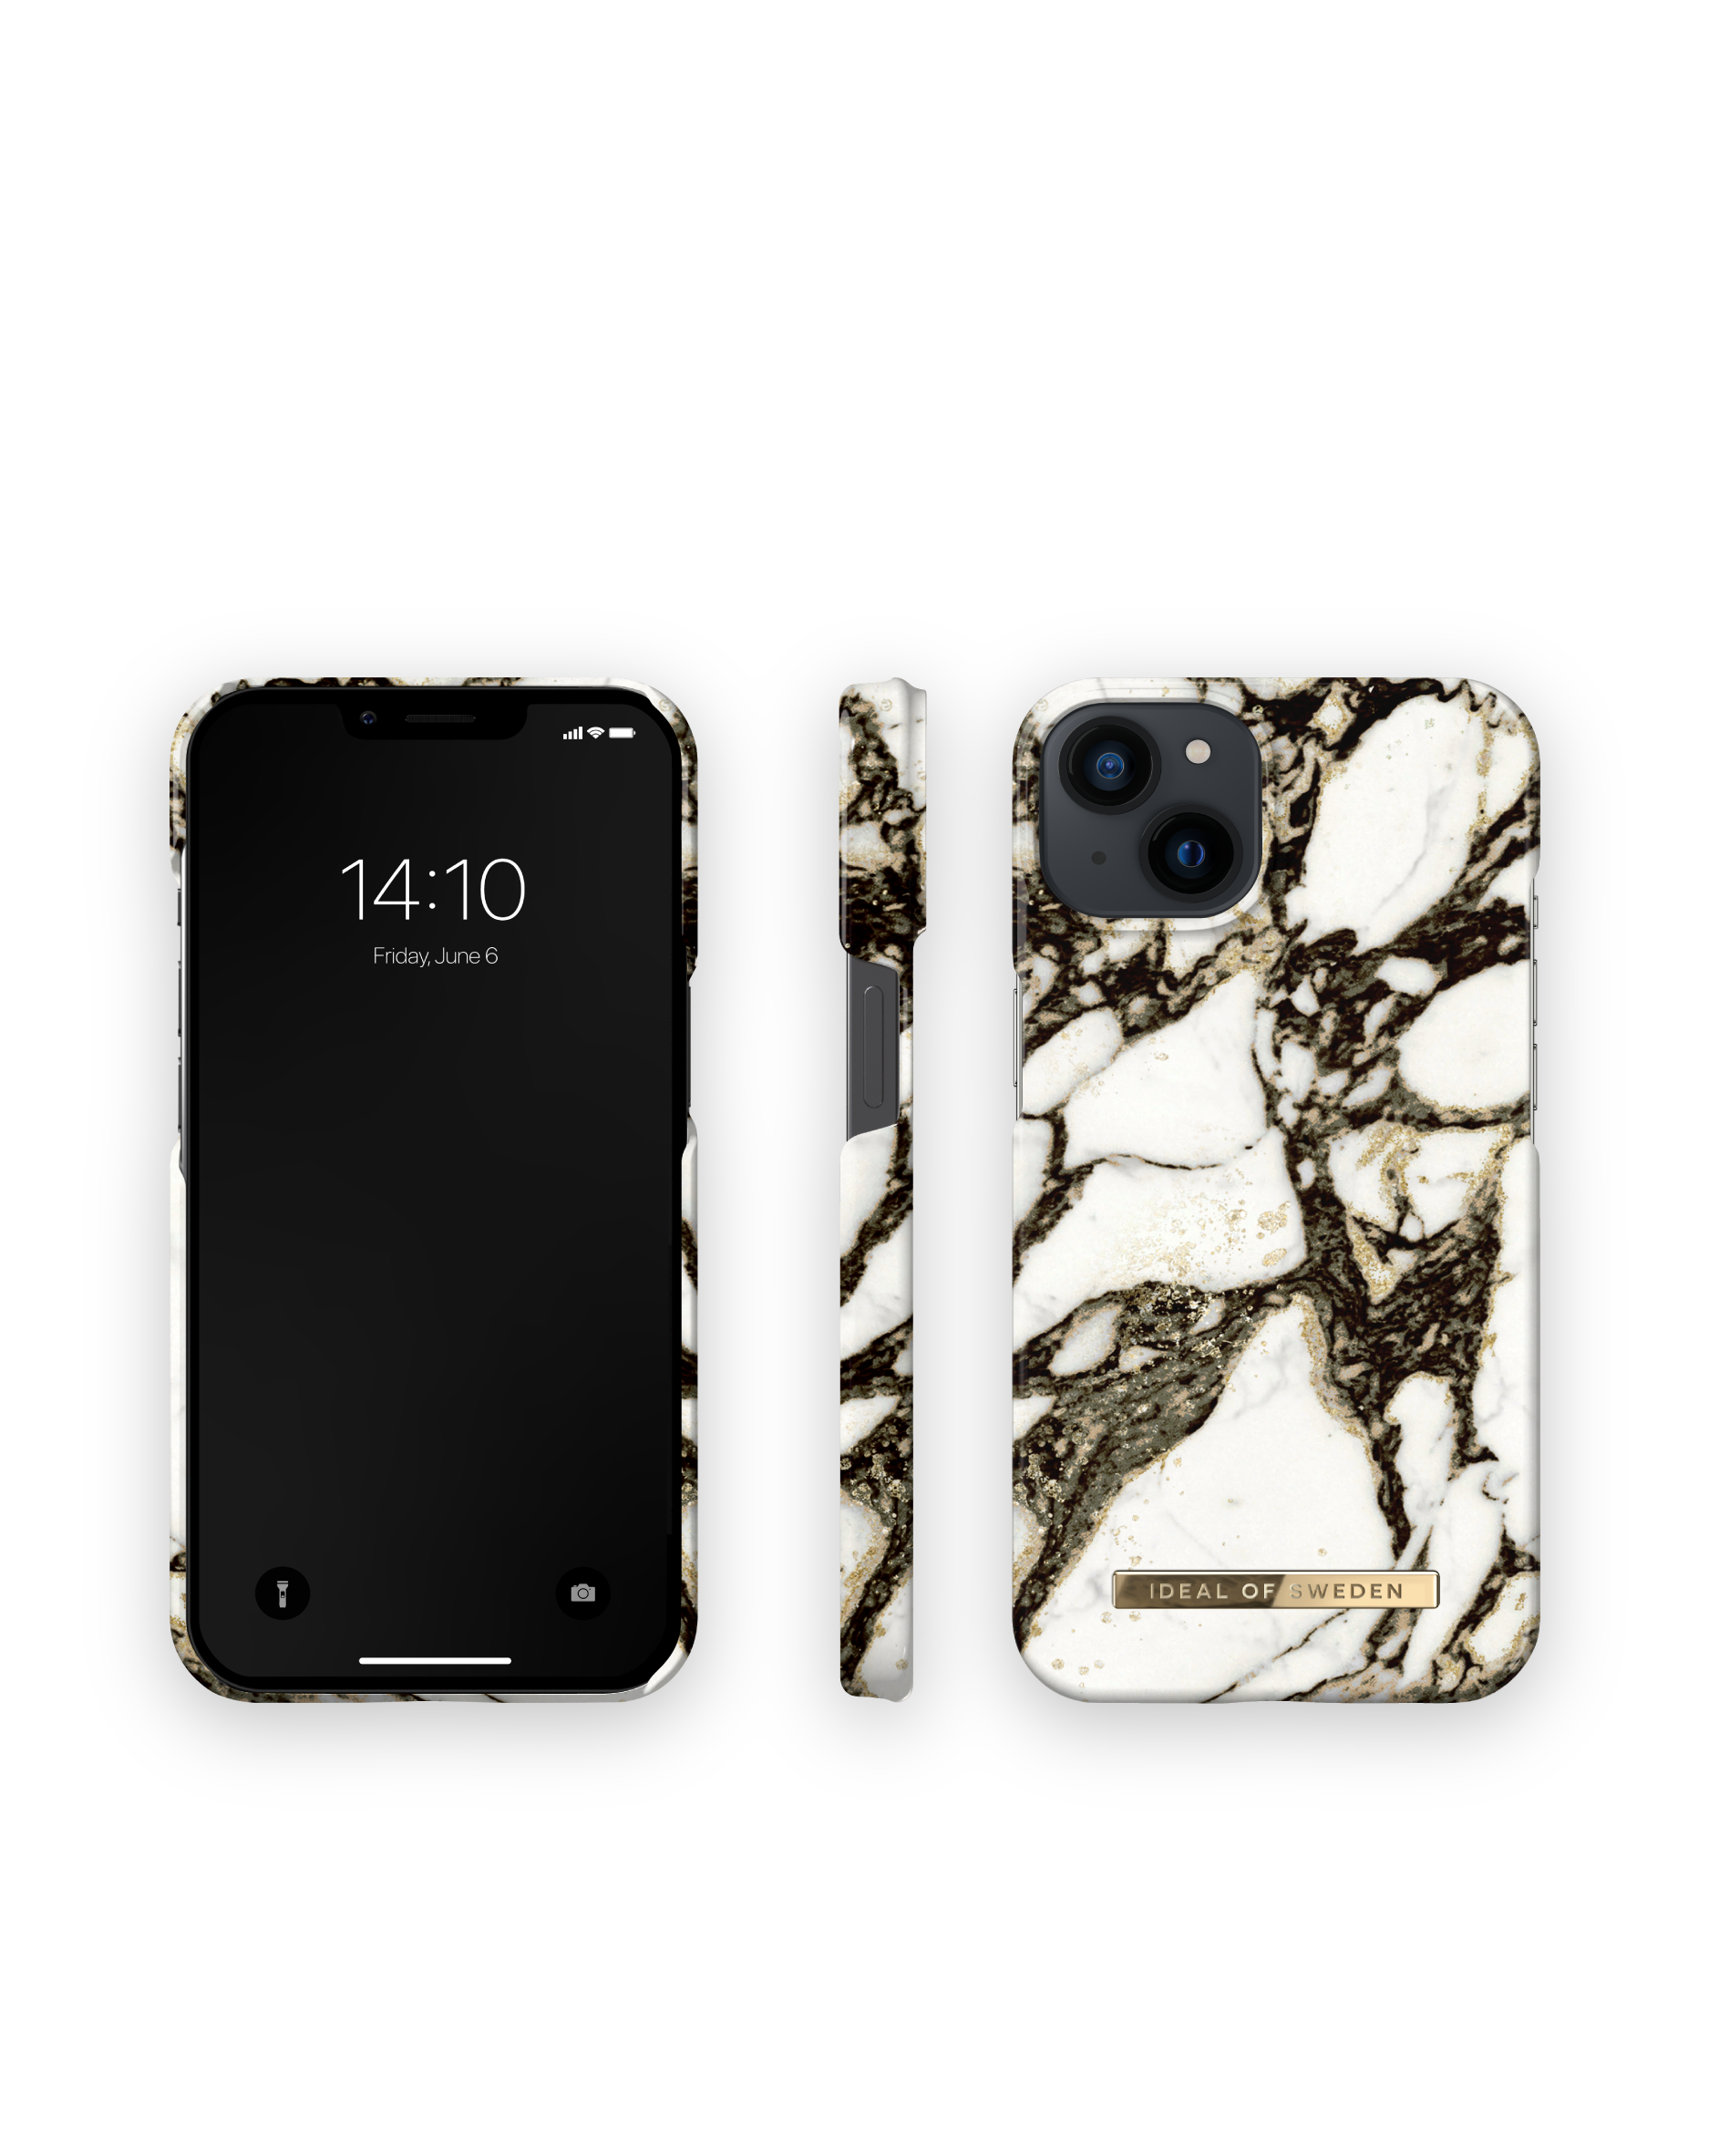 Calacatta 13, Backcover, Golden SWEDEN Marble IDEAL IDFCMR21-I2161-380, OF iPhone Apple,